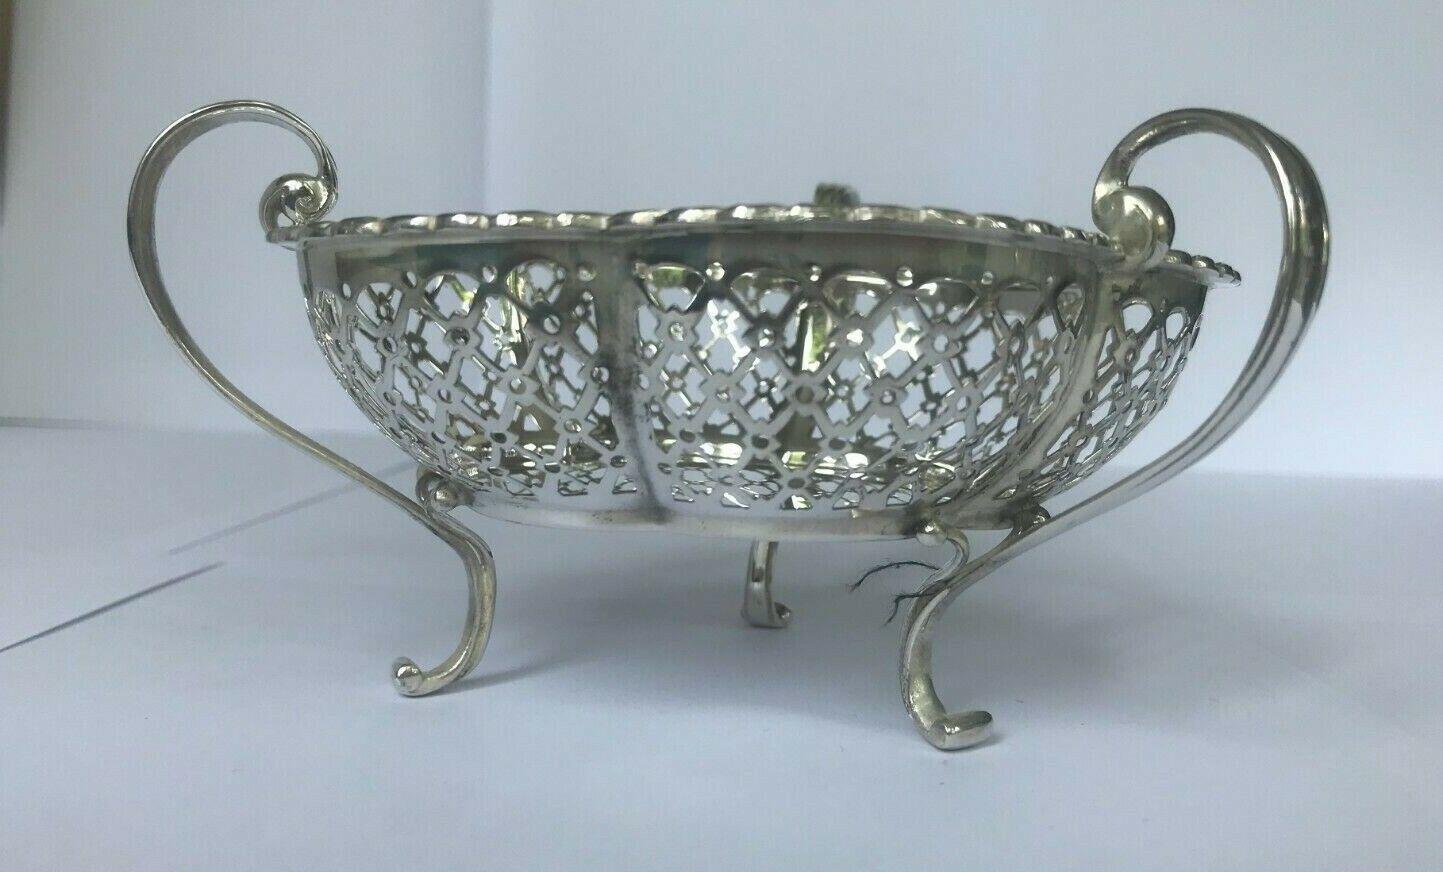 Bonbon Dish in Sterling Silver by Synyer & Beddoes, 1910 For Sale 1